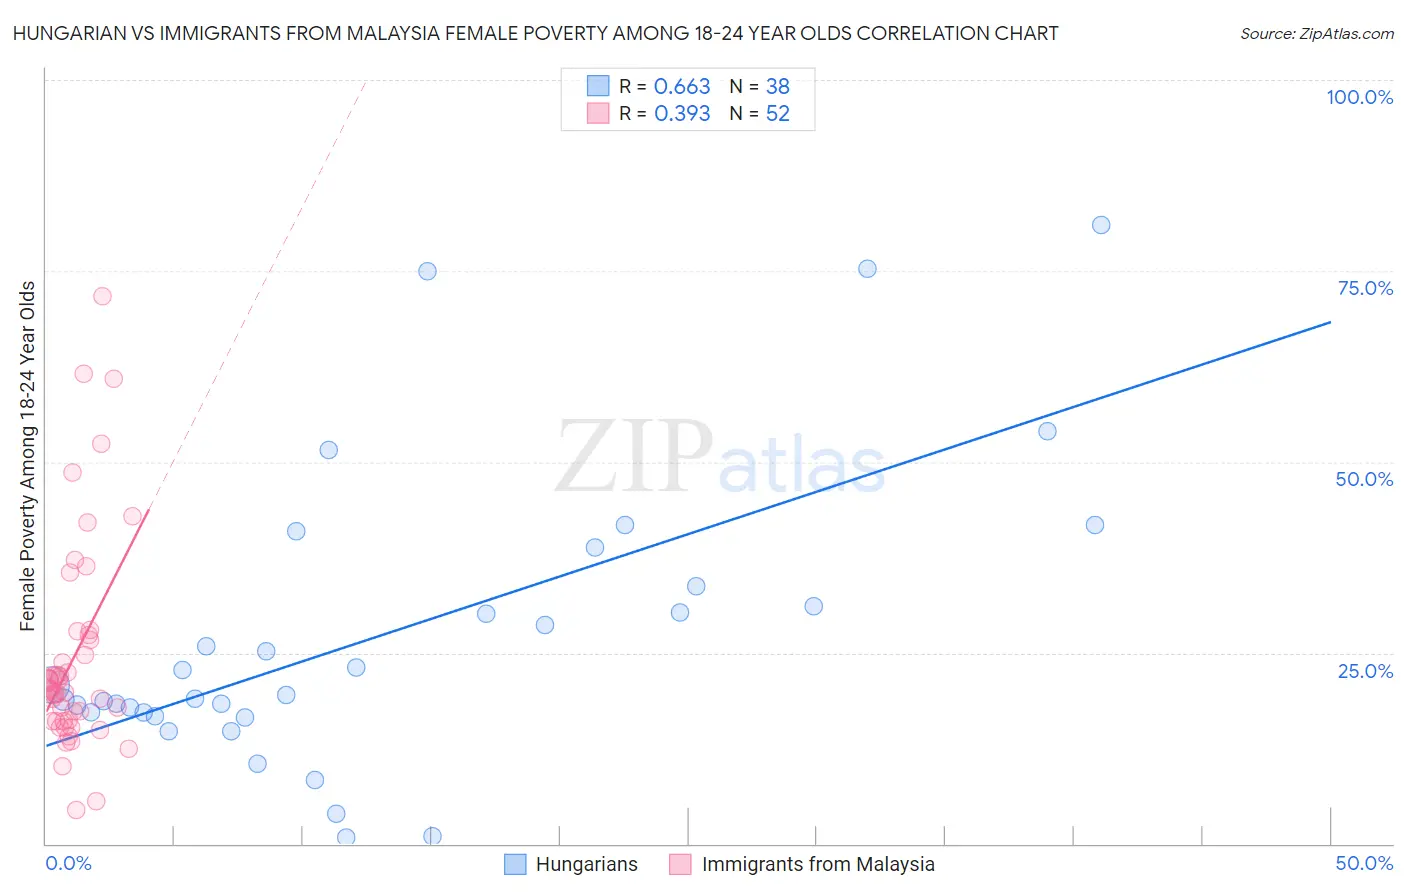 Hungarian vs Immigrants from Malaysia Female Poverty Among 18-24 Year Olds